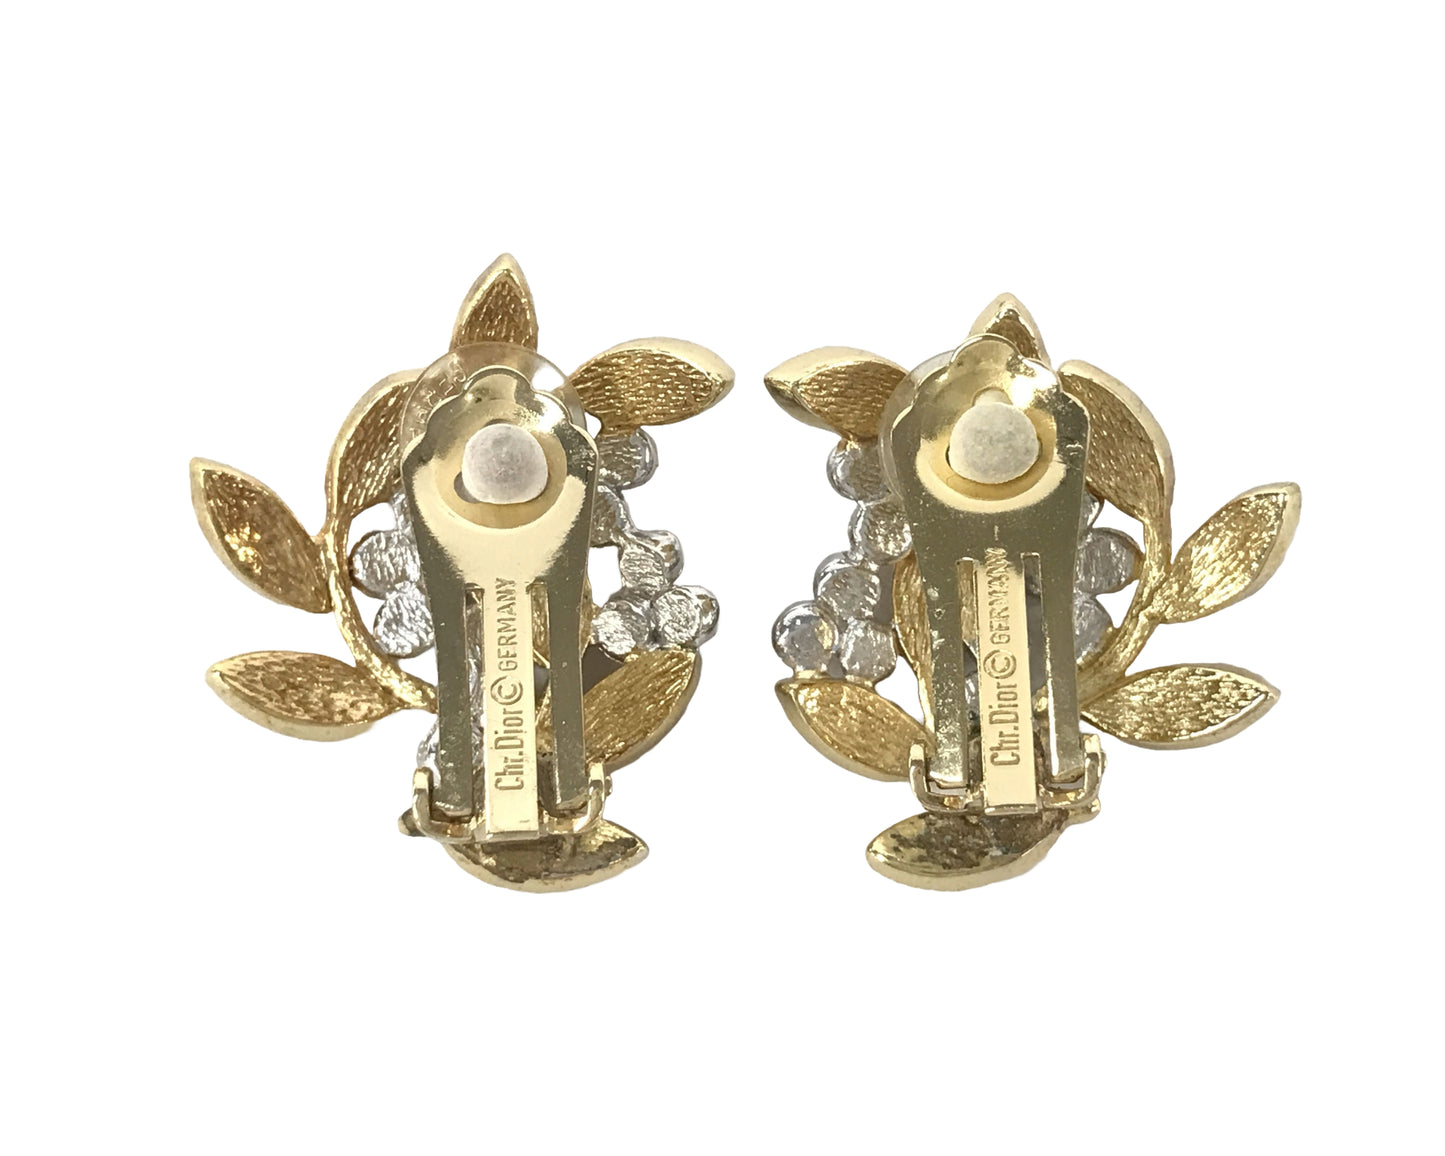 CHRISTIAN DIOR VINTAGE, 100% Authentic Genuine Clipped On Earrings, Embossed Floral and Leaves, Gold and Silver, 1990's, Grade AB